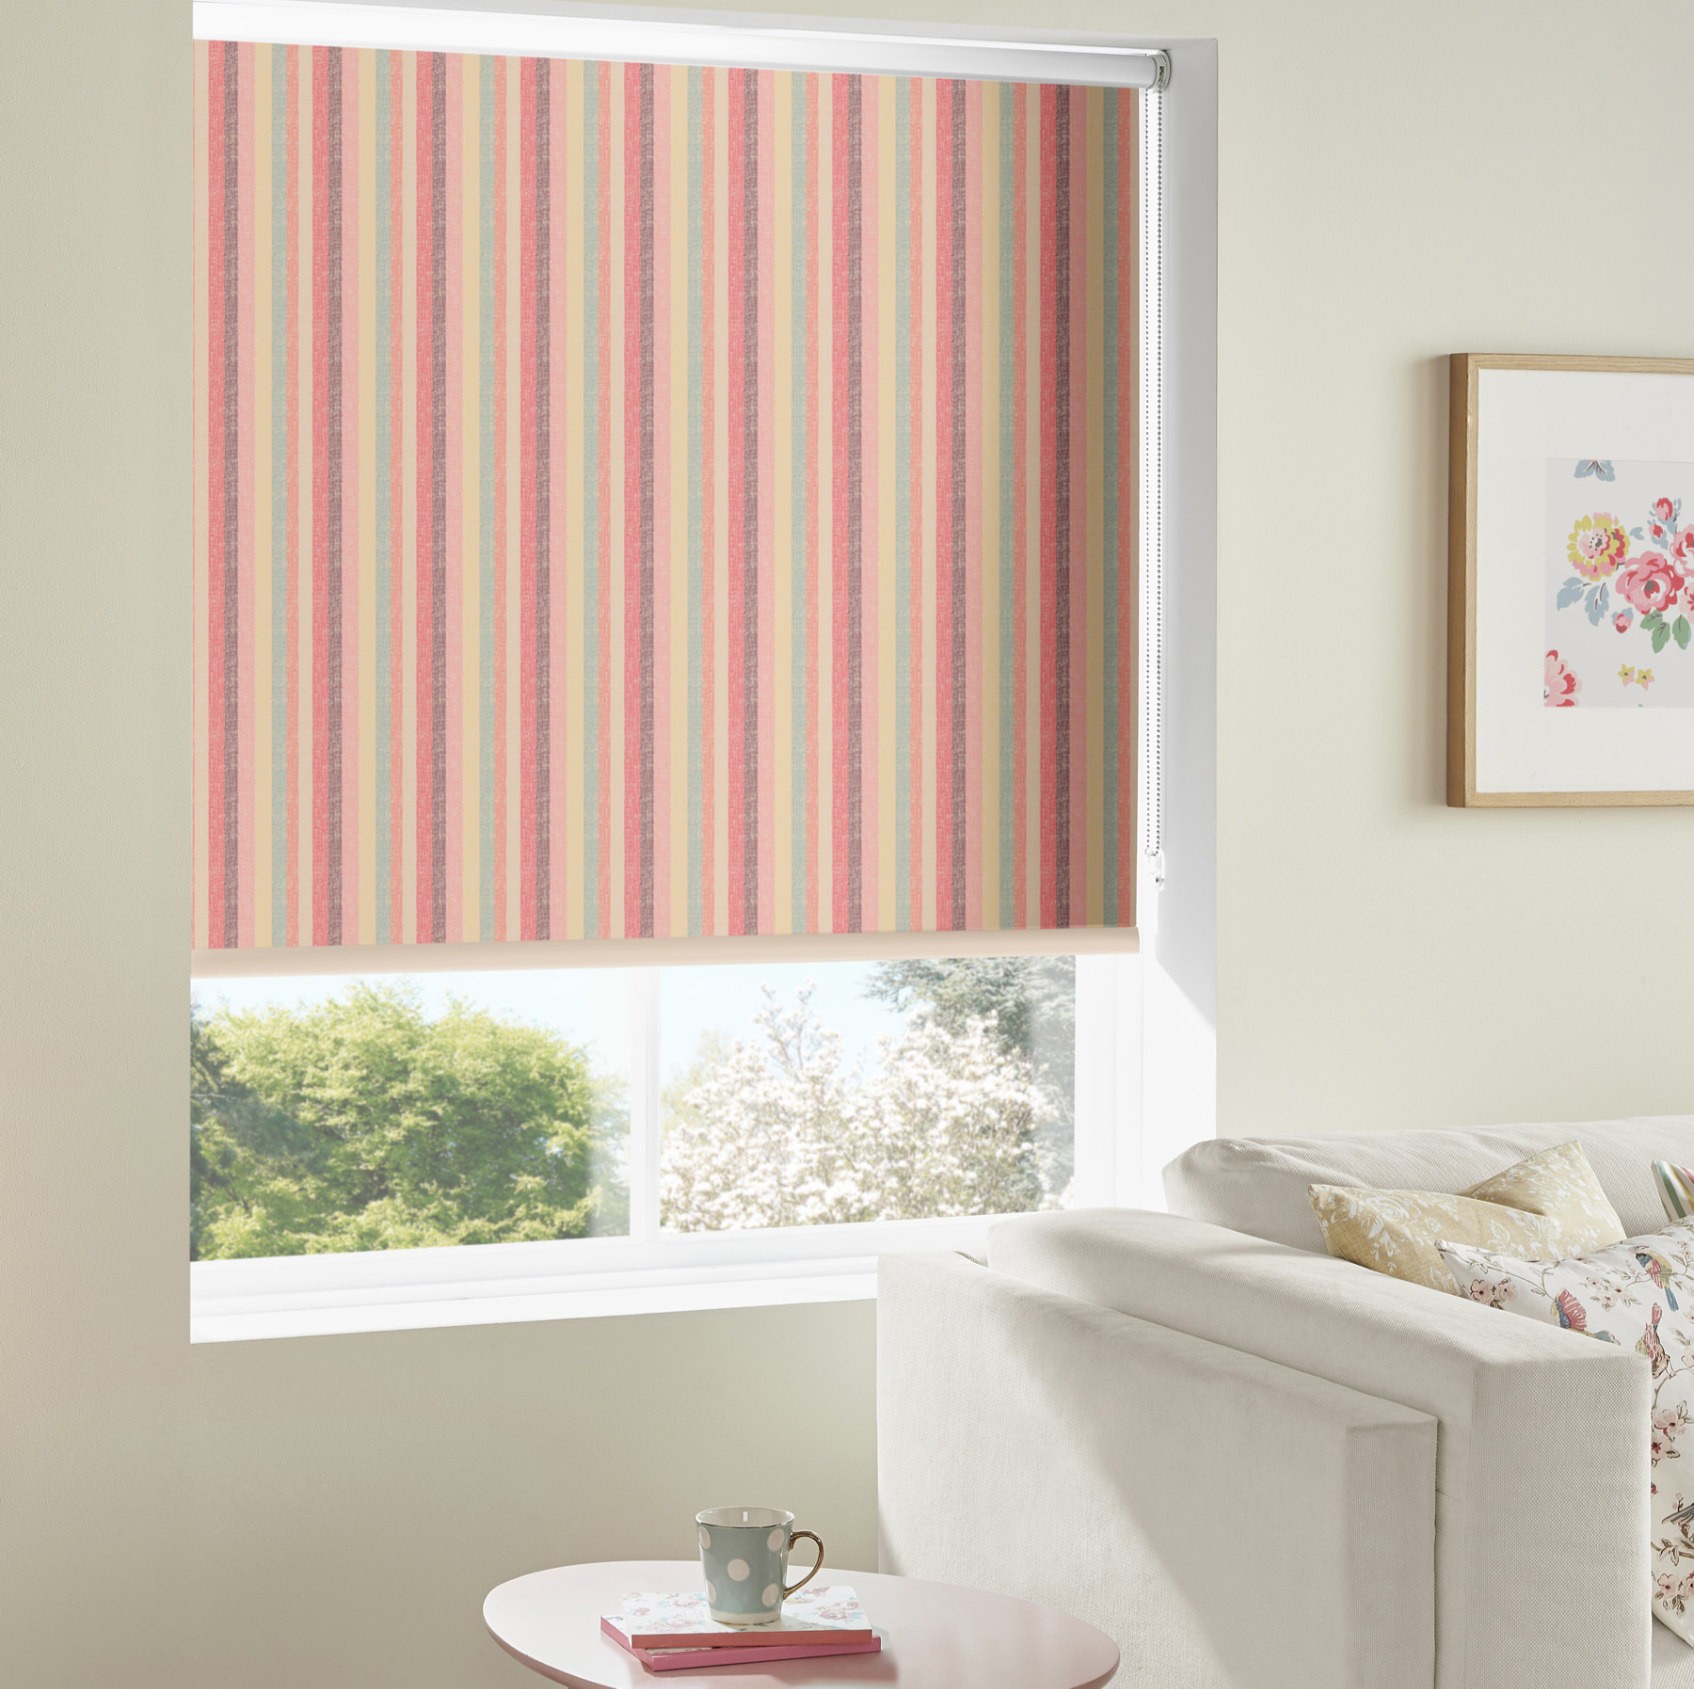 Cath Kidston Textured Stripe Dimout Roller Blind